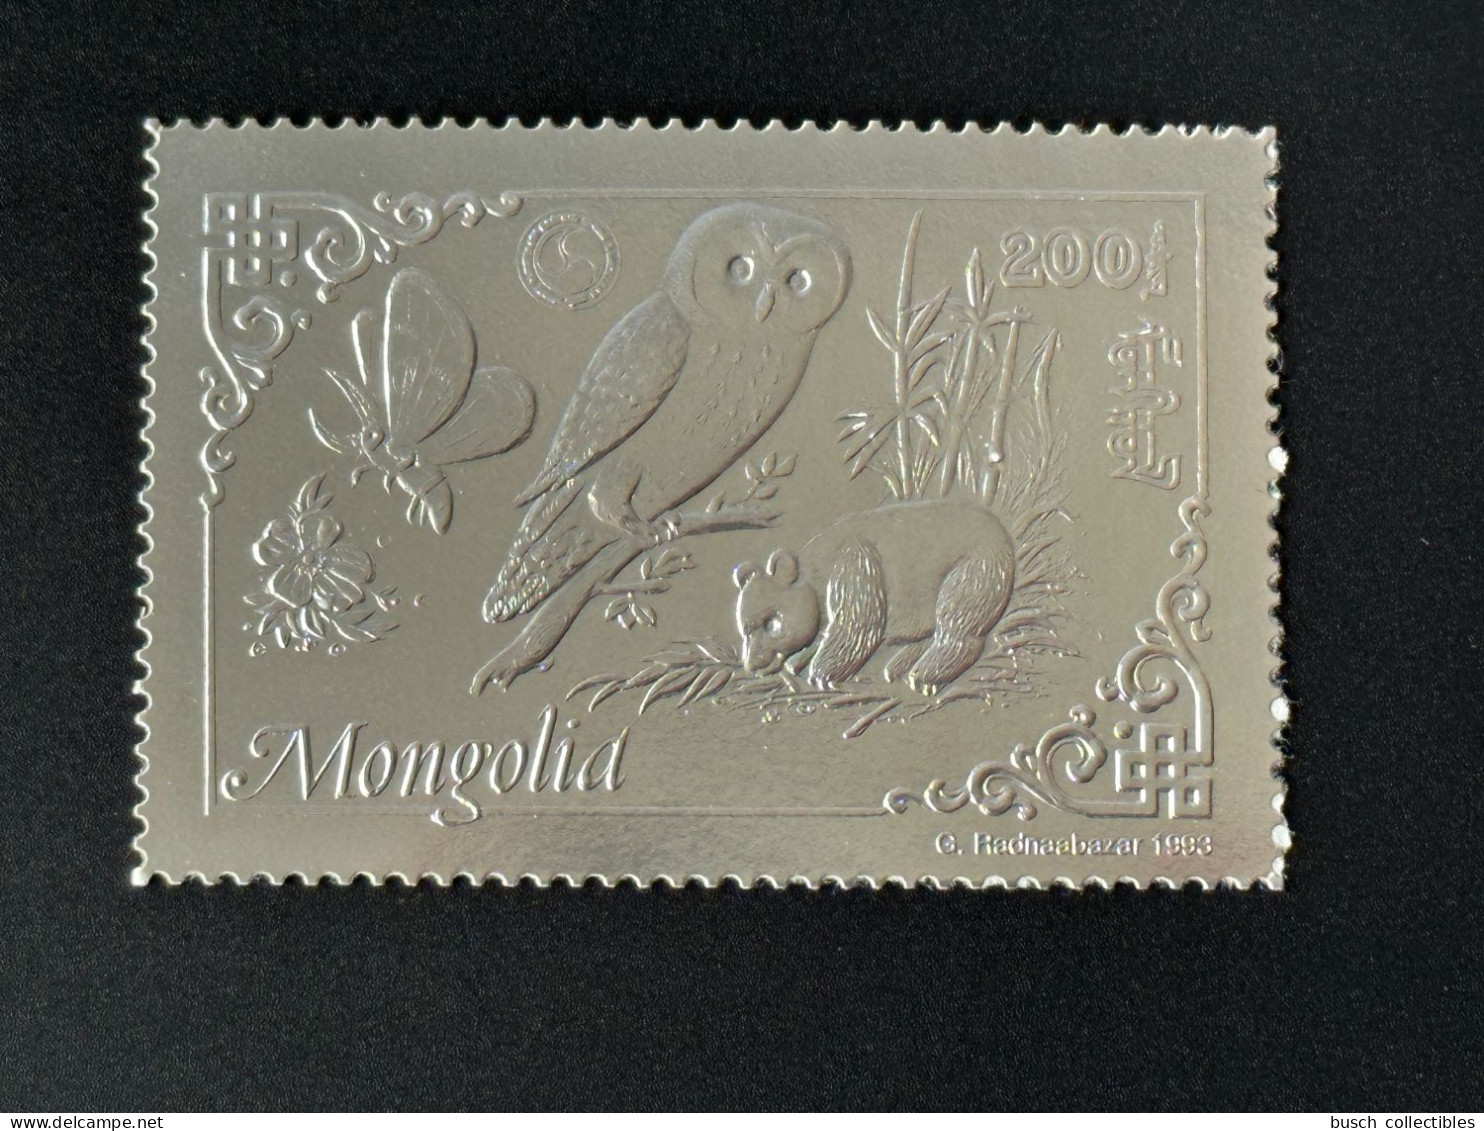 Mongolie Mongolia 1993 Mi. 2476 A Silver Argent Rotary Lions Butterfly Owl Eule Panda Papillon Schmetterling Chouette - Ours